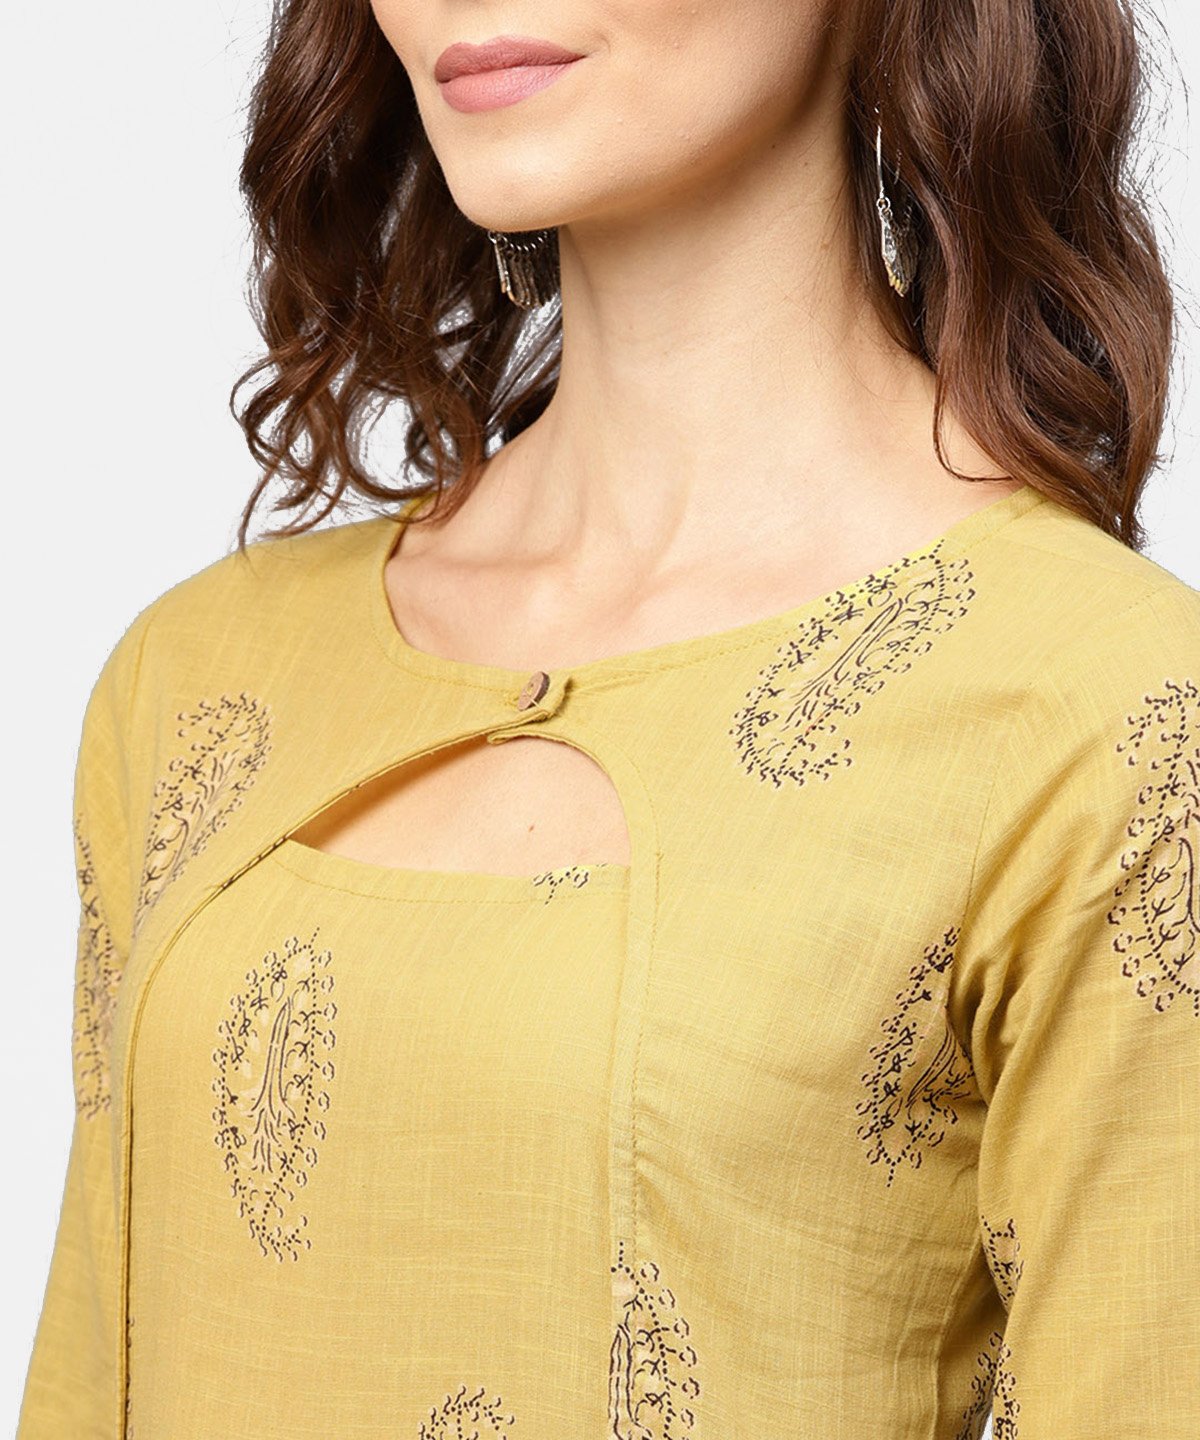 Women's Mustard Printed Round Neck With Loop And Button In Front, Pleated With 3/4Th Sleeves Dress - Nayo Clothing